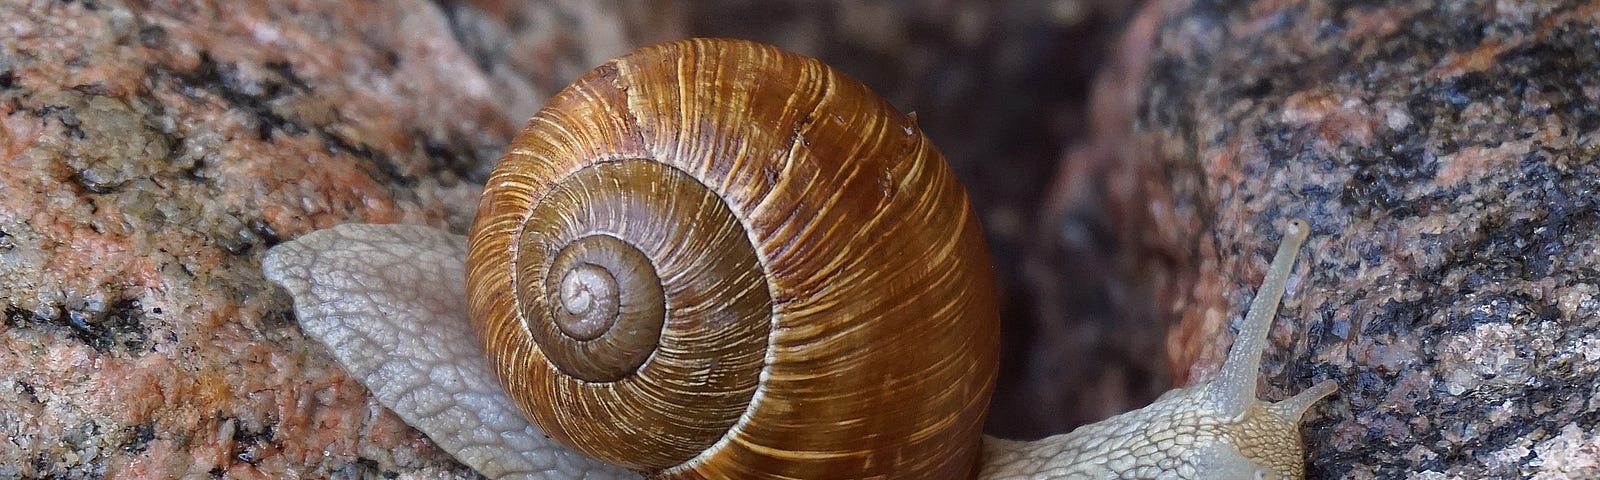 a grey snail blends in as it crawls along on a rock. A spiral shell is on it’s back.